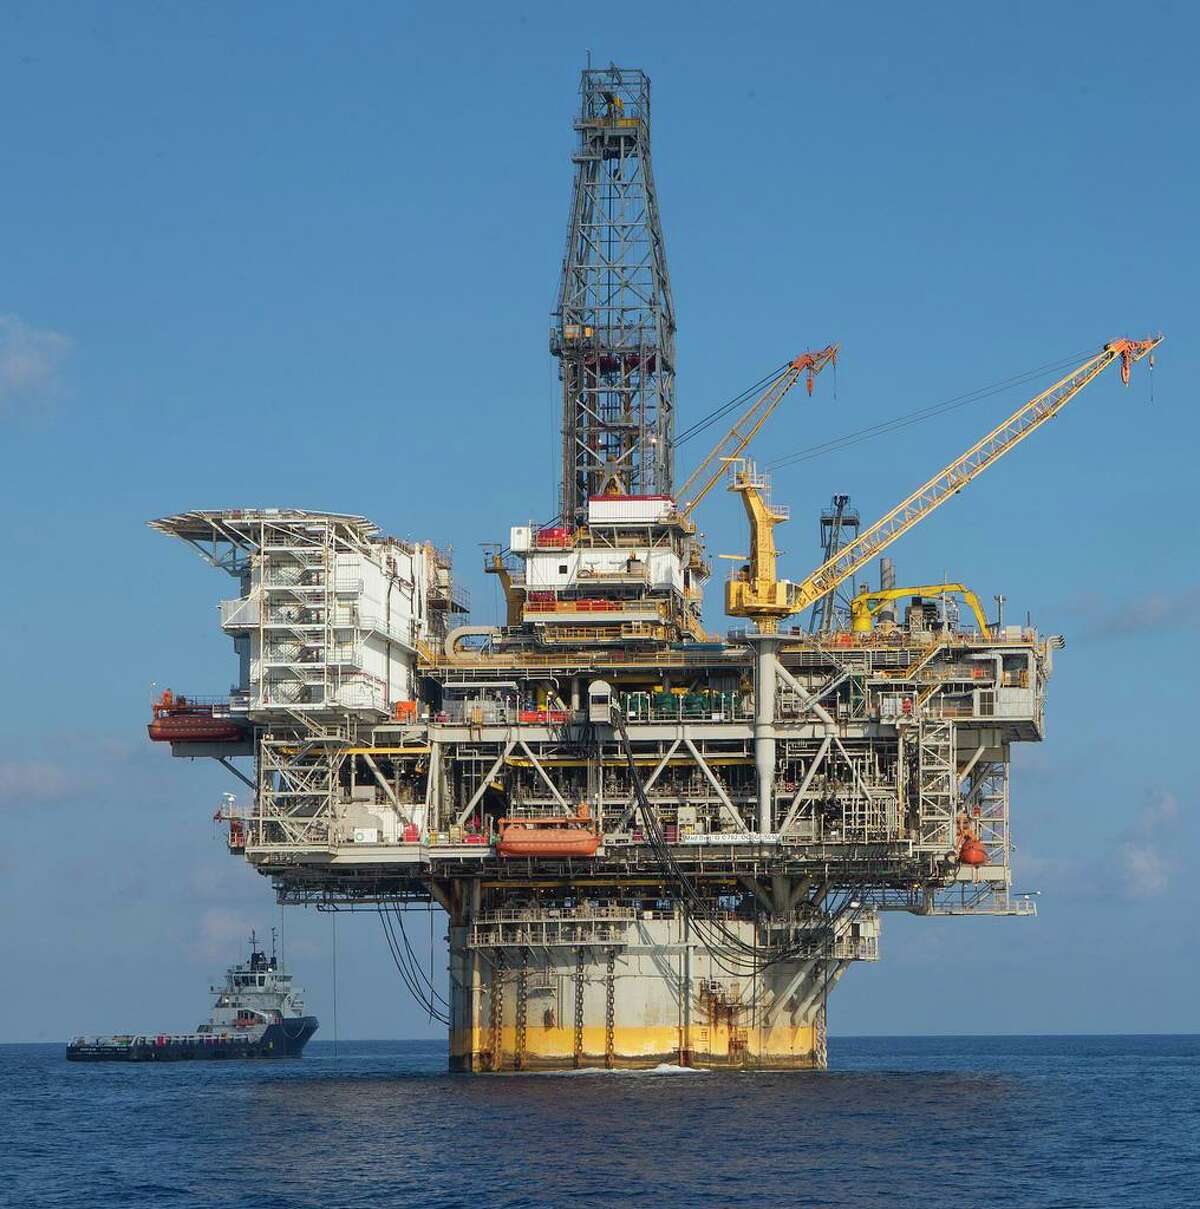 BP’s Mad Dog platform operates in the Gulf of Mexico. Oil produced in the Gulf of Mexico has a relativel lower carbon footprint, according to S&P Global Platts.